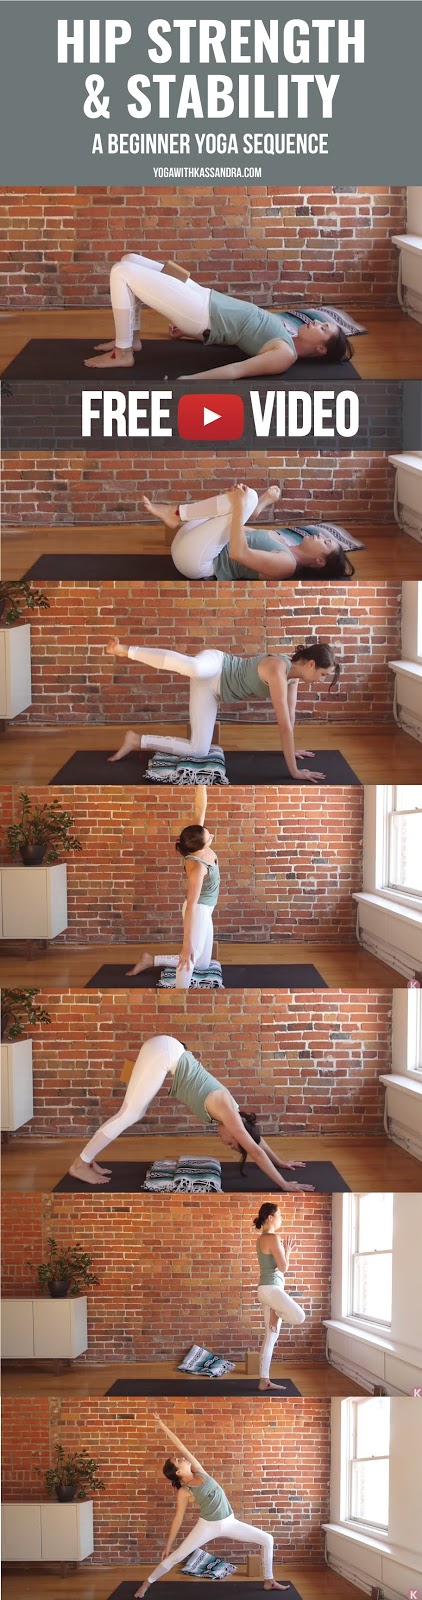 Many if not most yoga practices focus on increasing flexibility and mobility, but when it comes to our hips it is equally important to ensure they are strong and stable. This strength will in turn increase your practice over time.